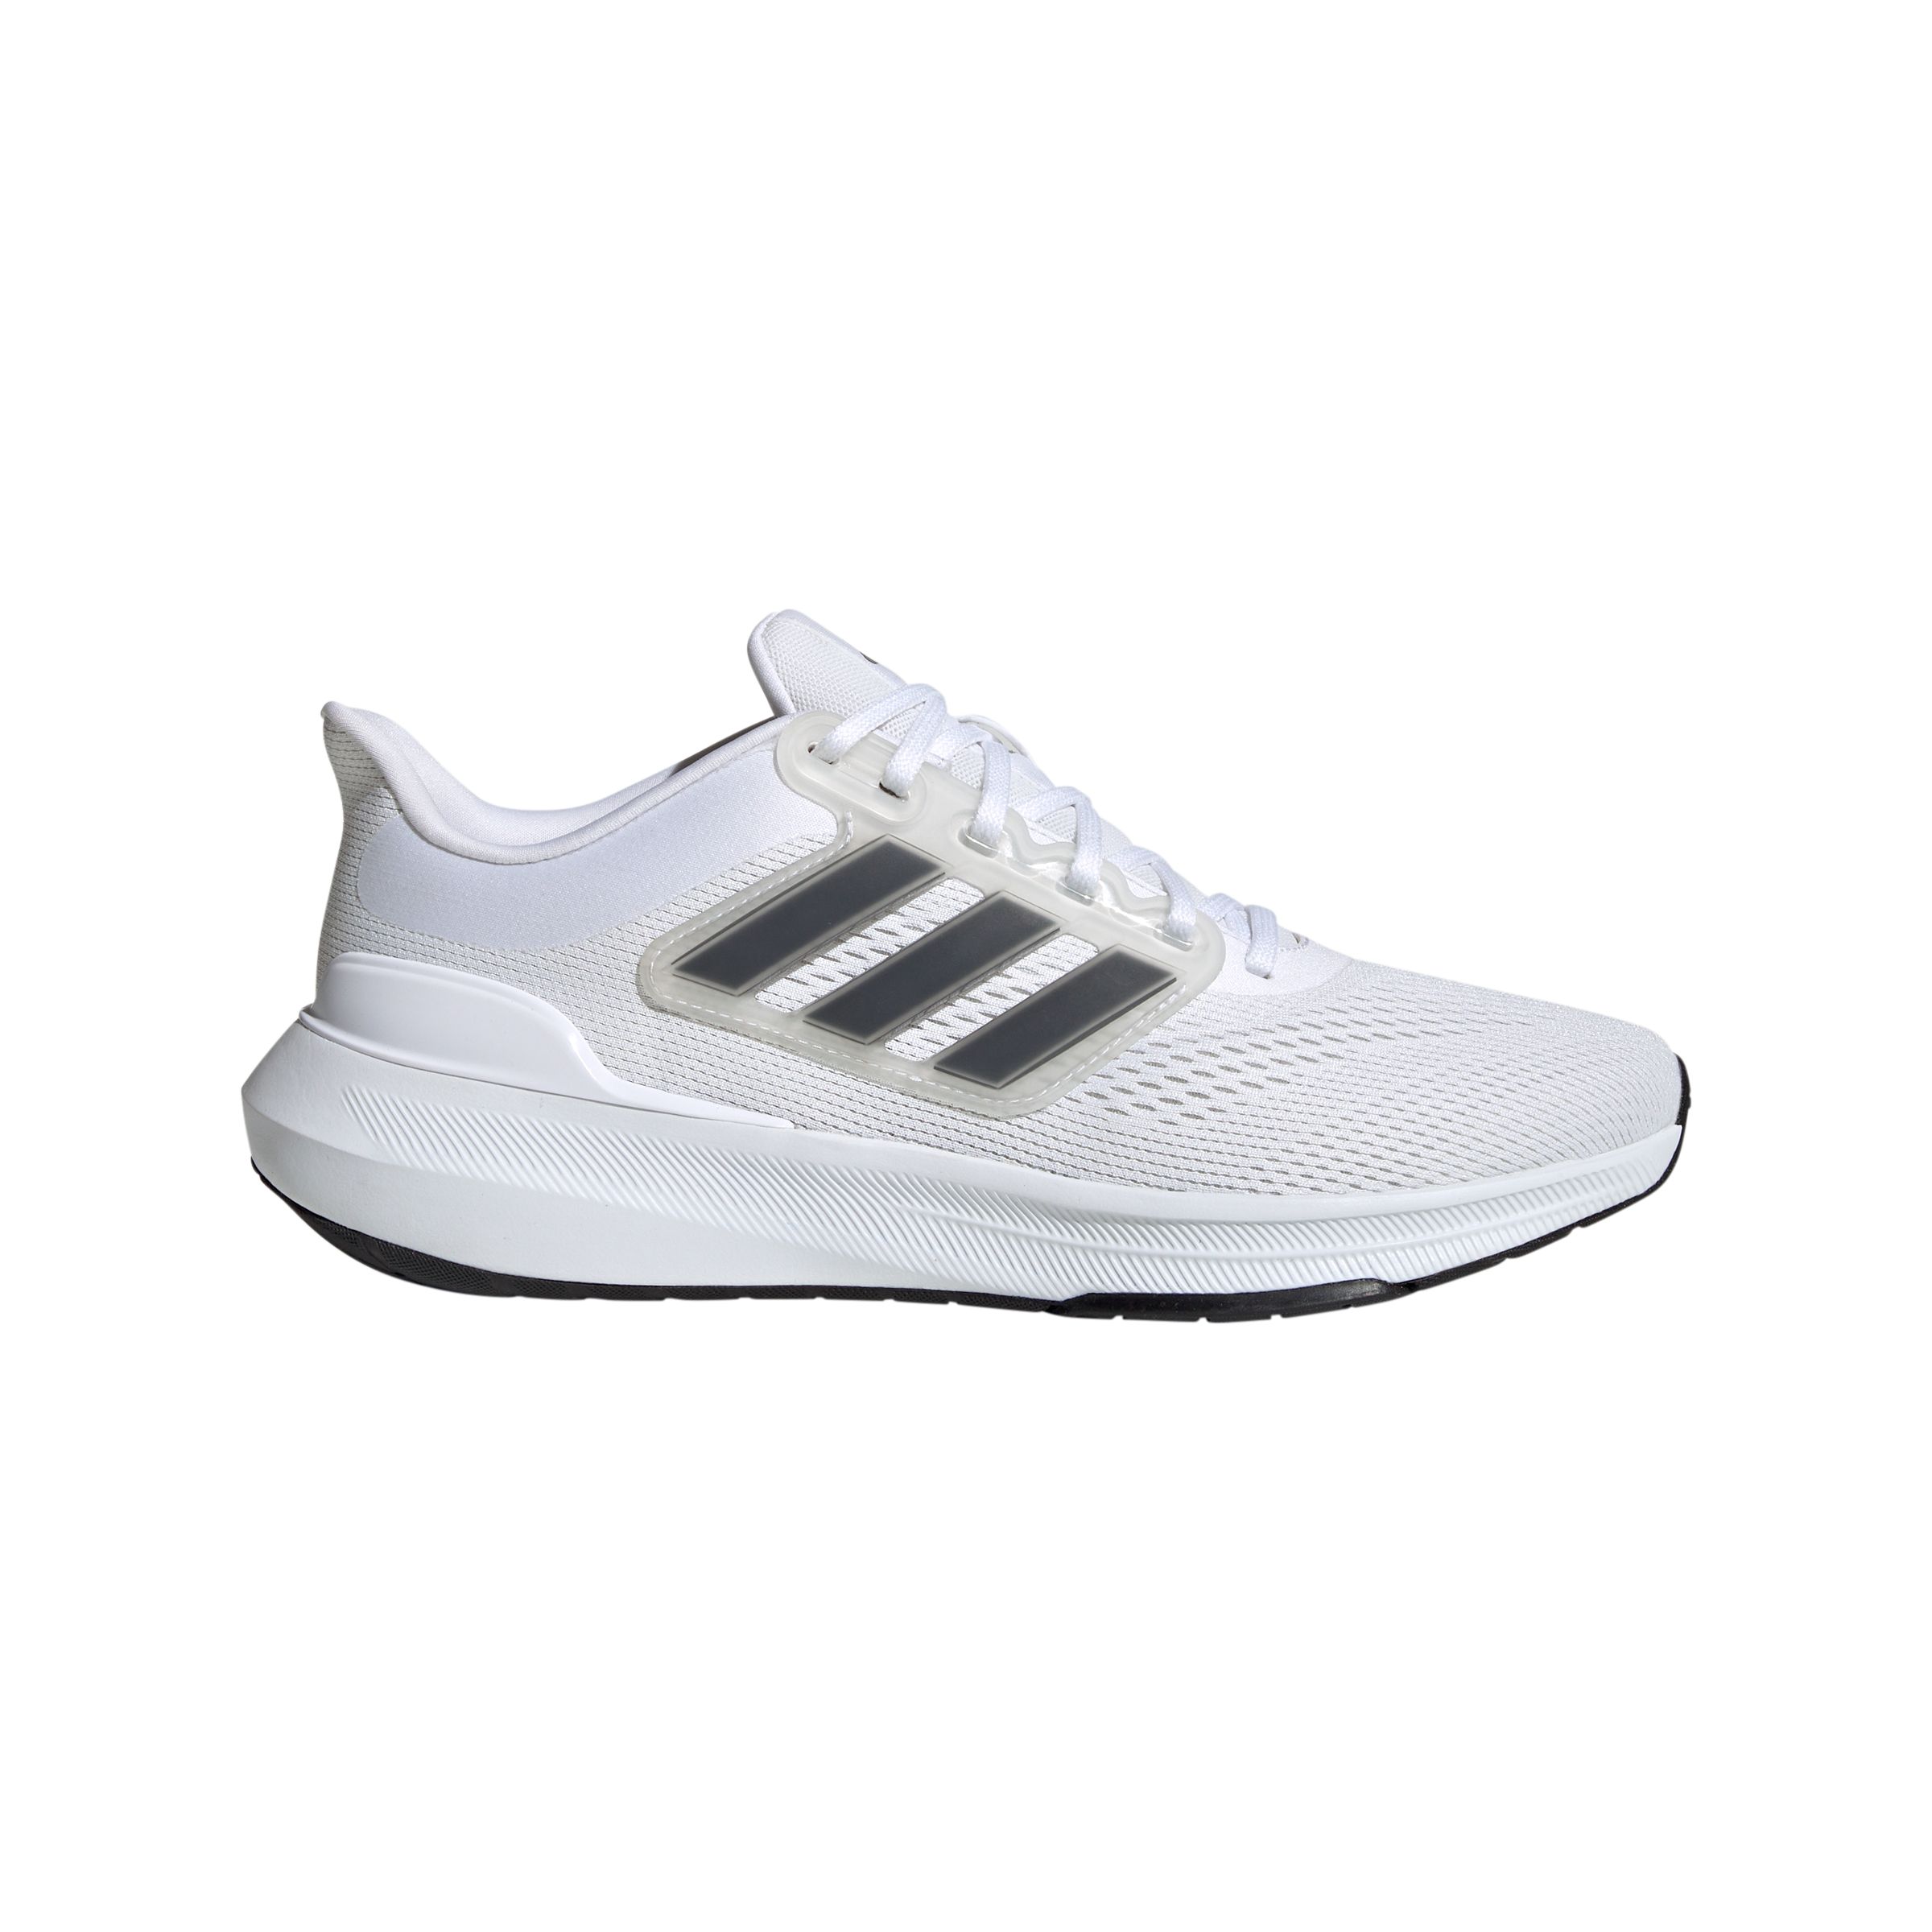 Image of adidas Men's Ultrabounce Flexible Textile Running Shoes